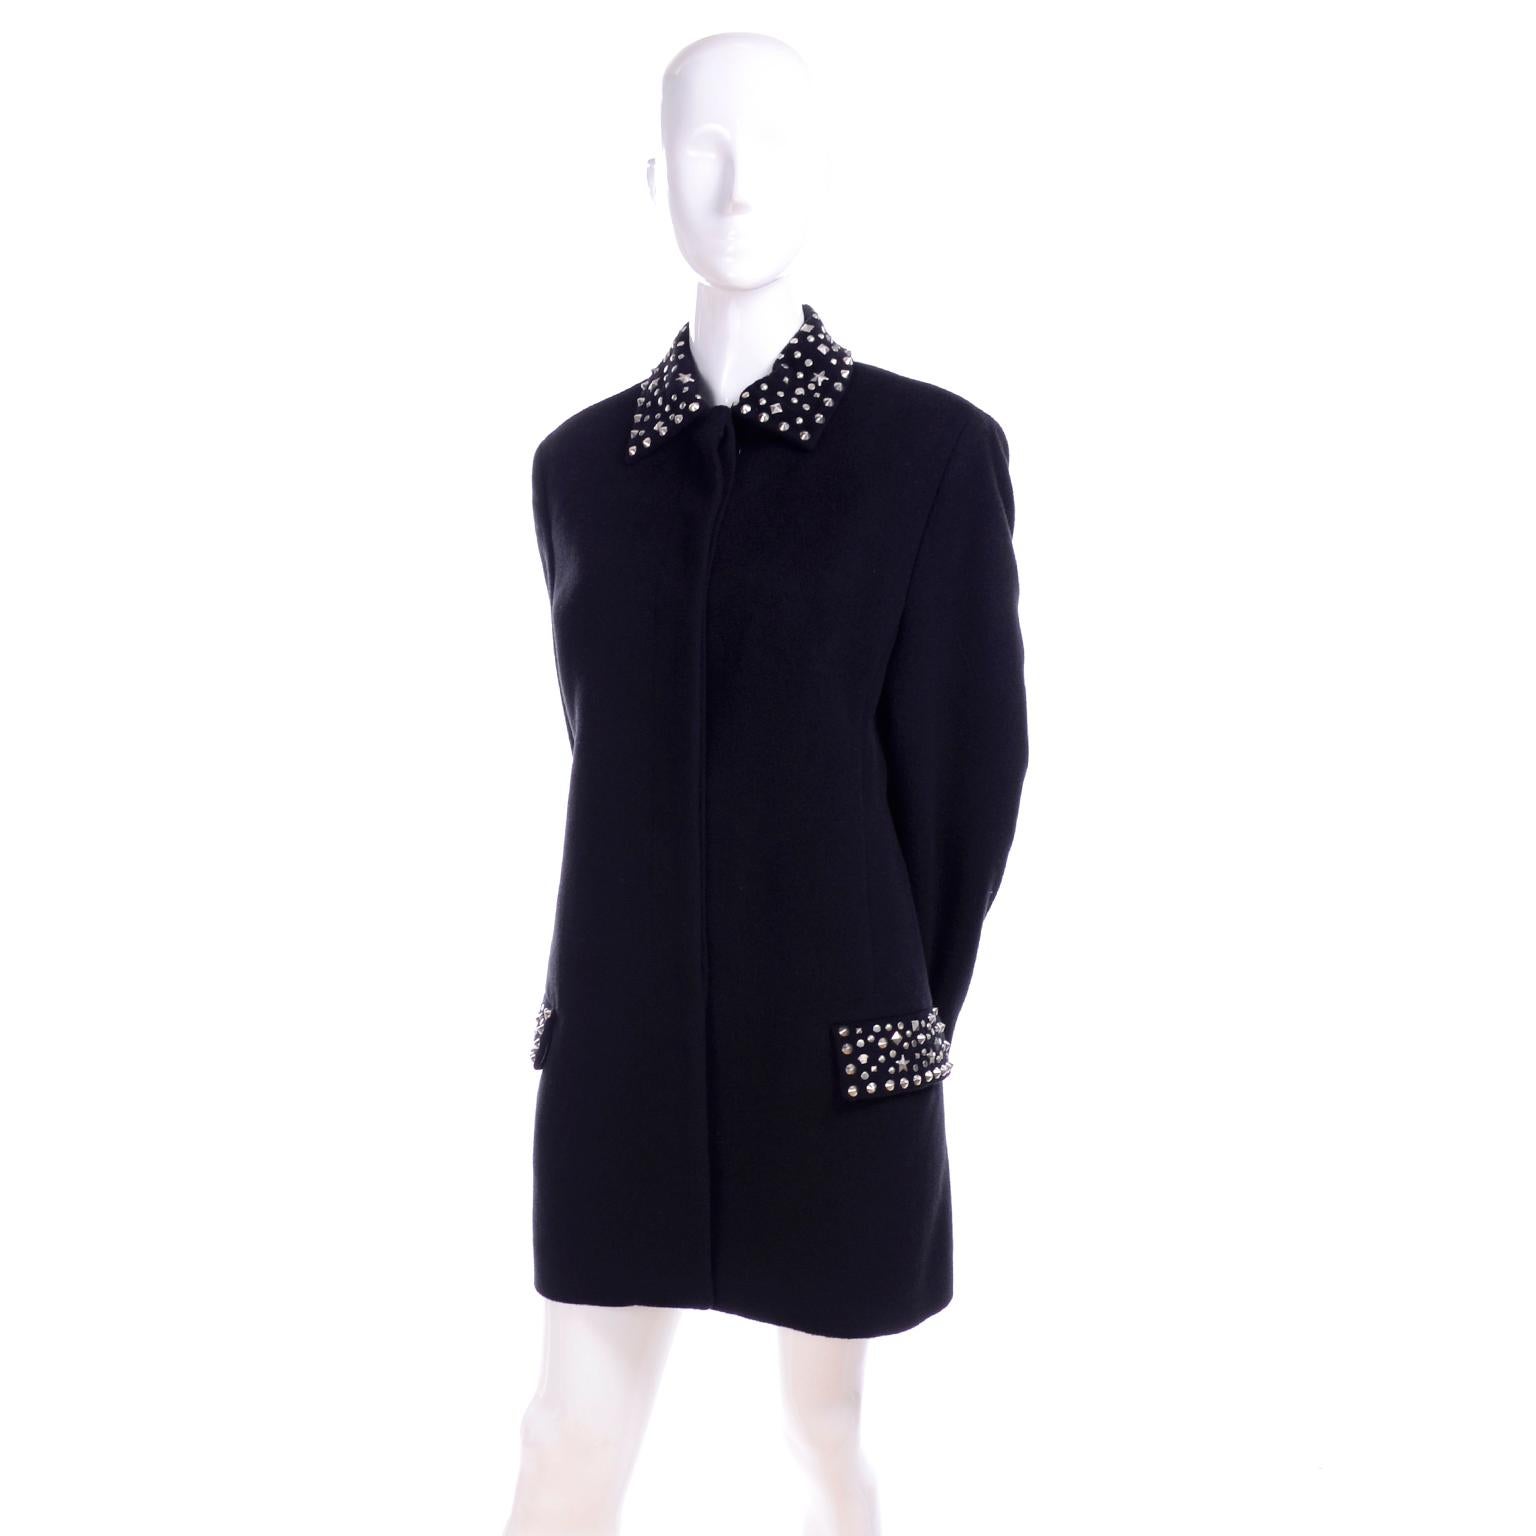 Black 1990s Gianni Versace Couture Jacket in Wool Cashmere Blend w/ Medusa Head Studs